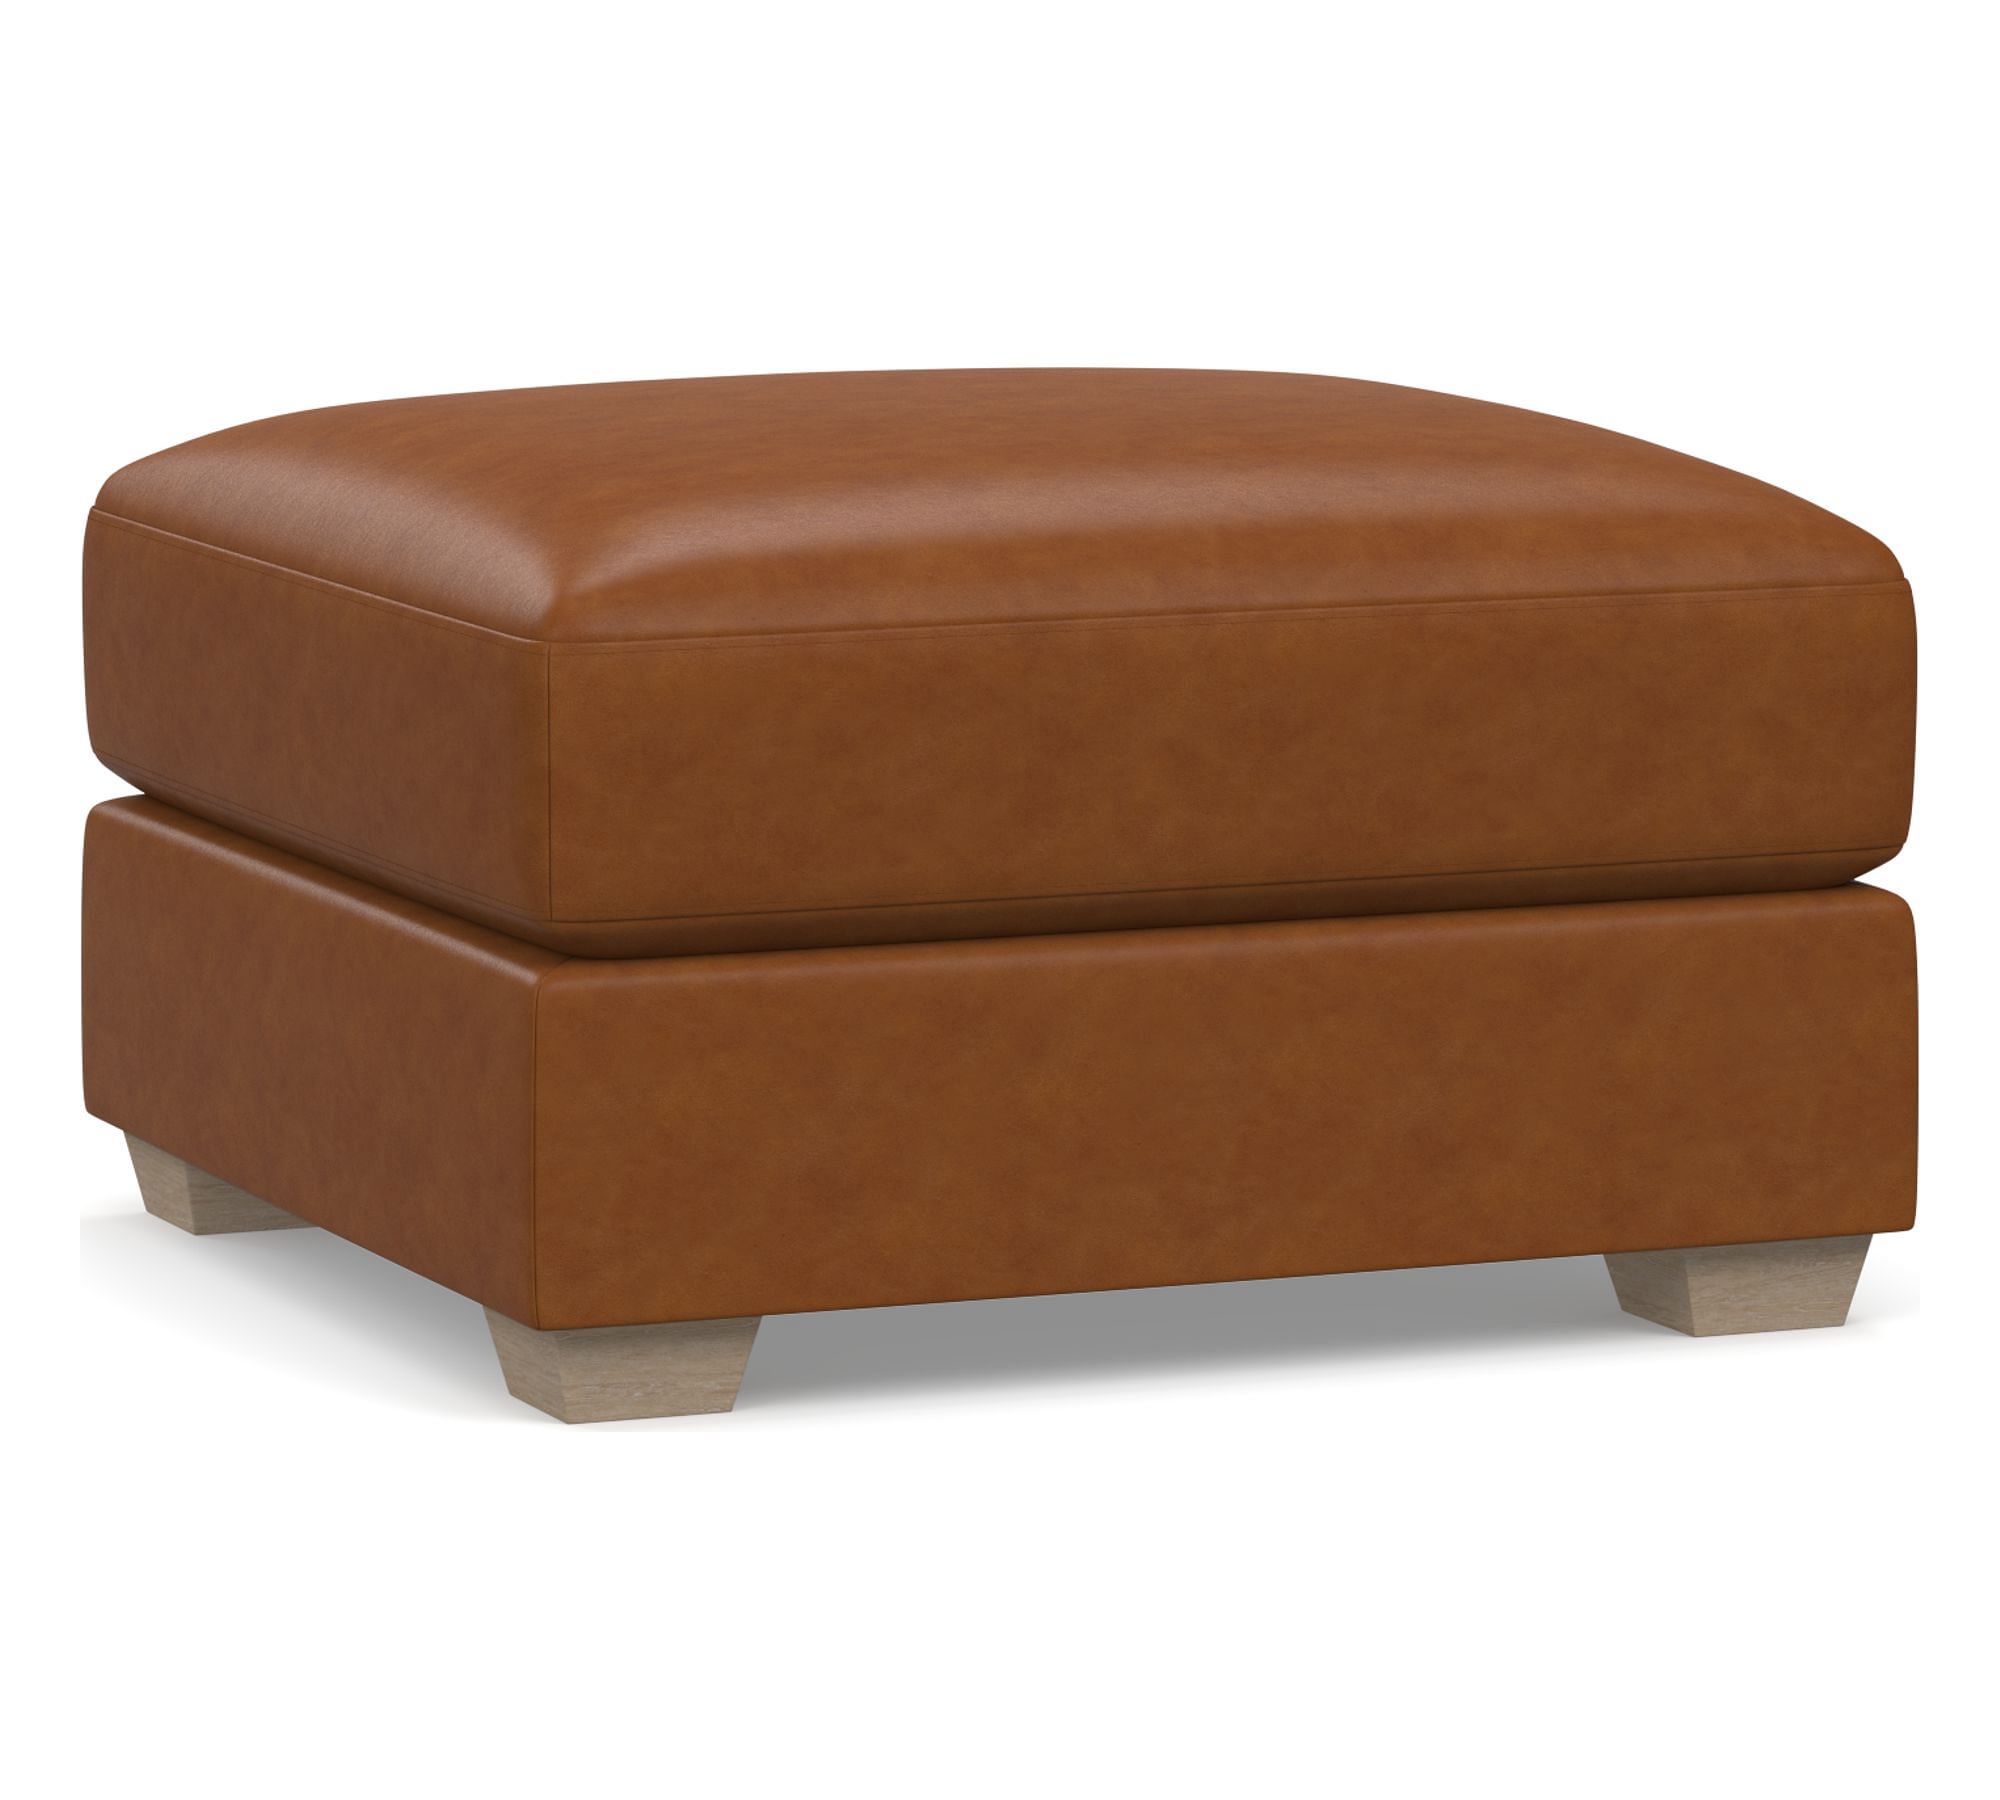 Canyon Leather Sectional Ottoman